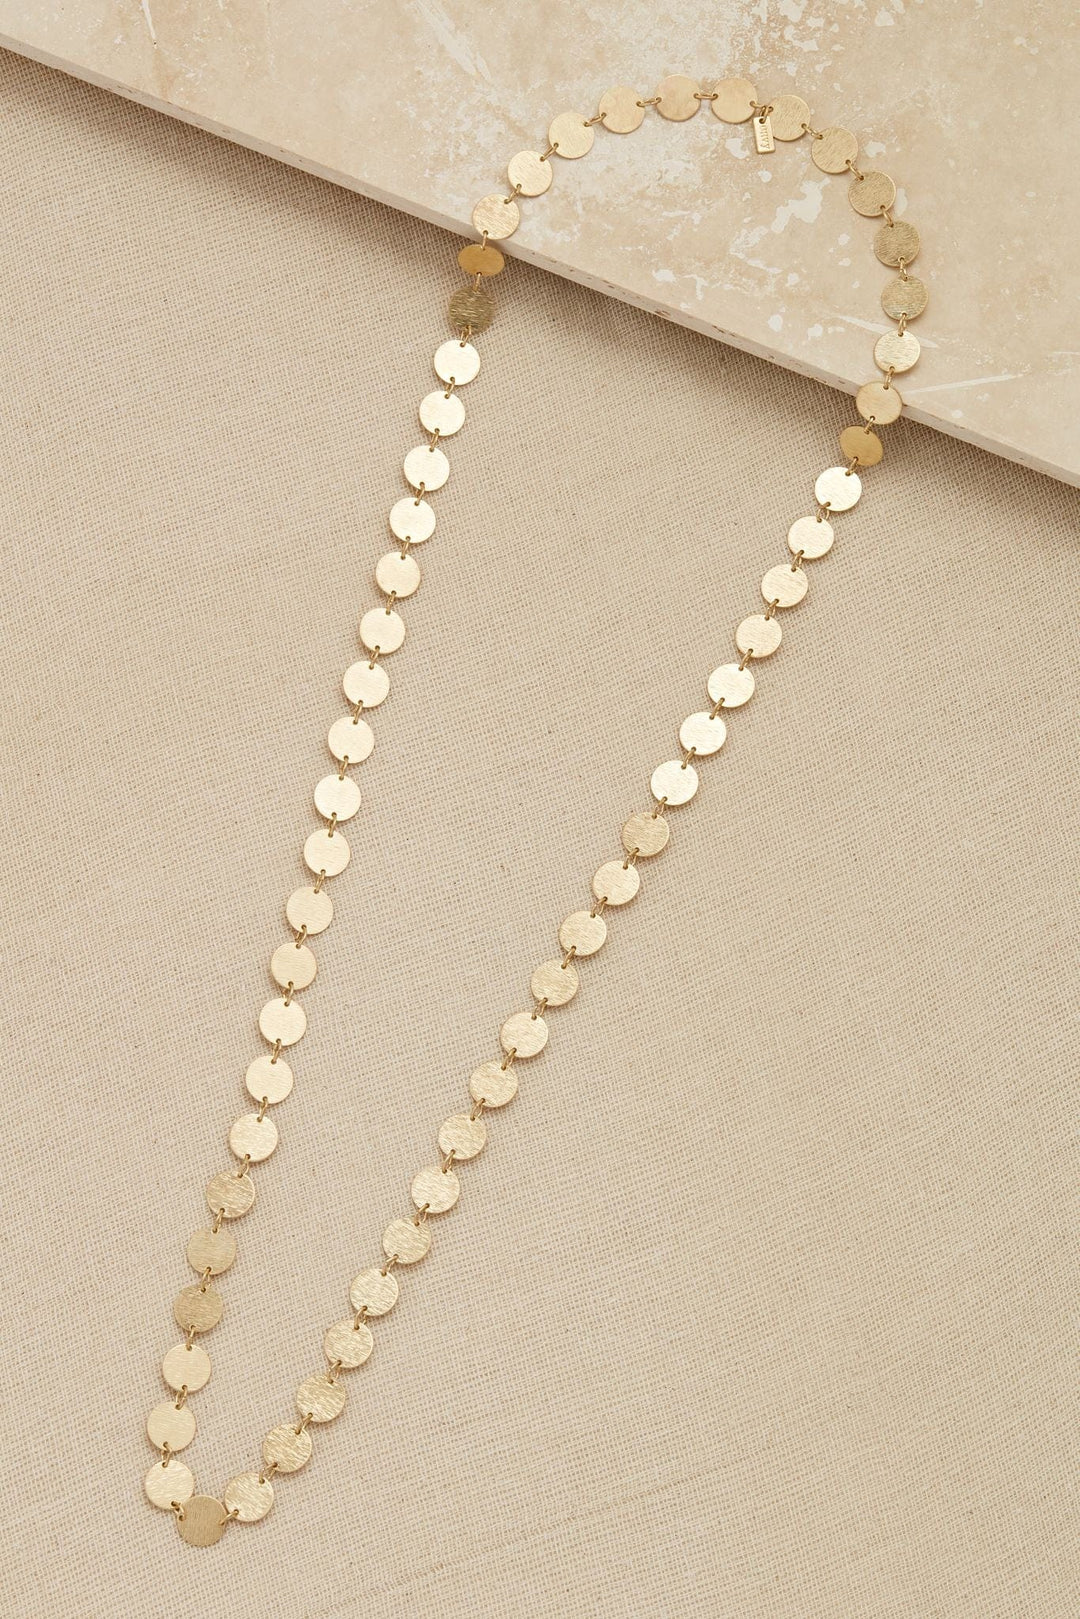 Envy Gold Necklace With Circle Links - Crabtree Cottage